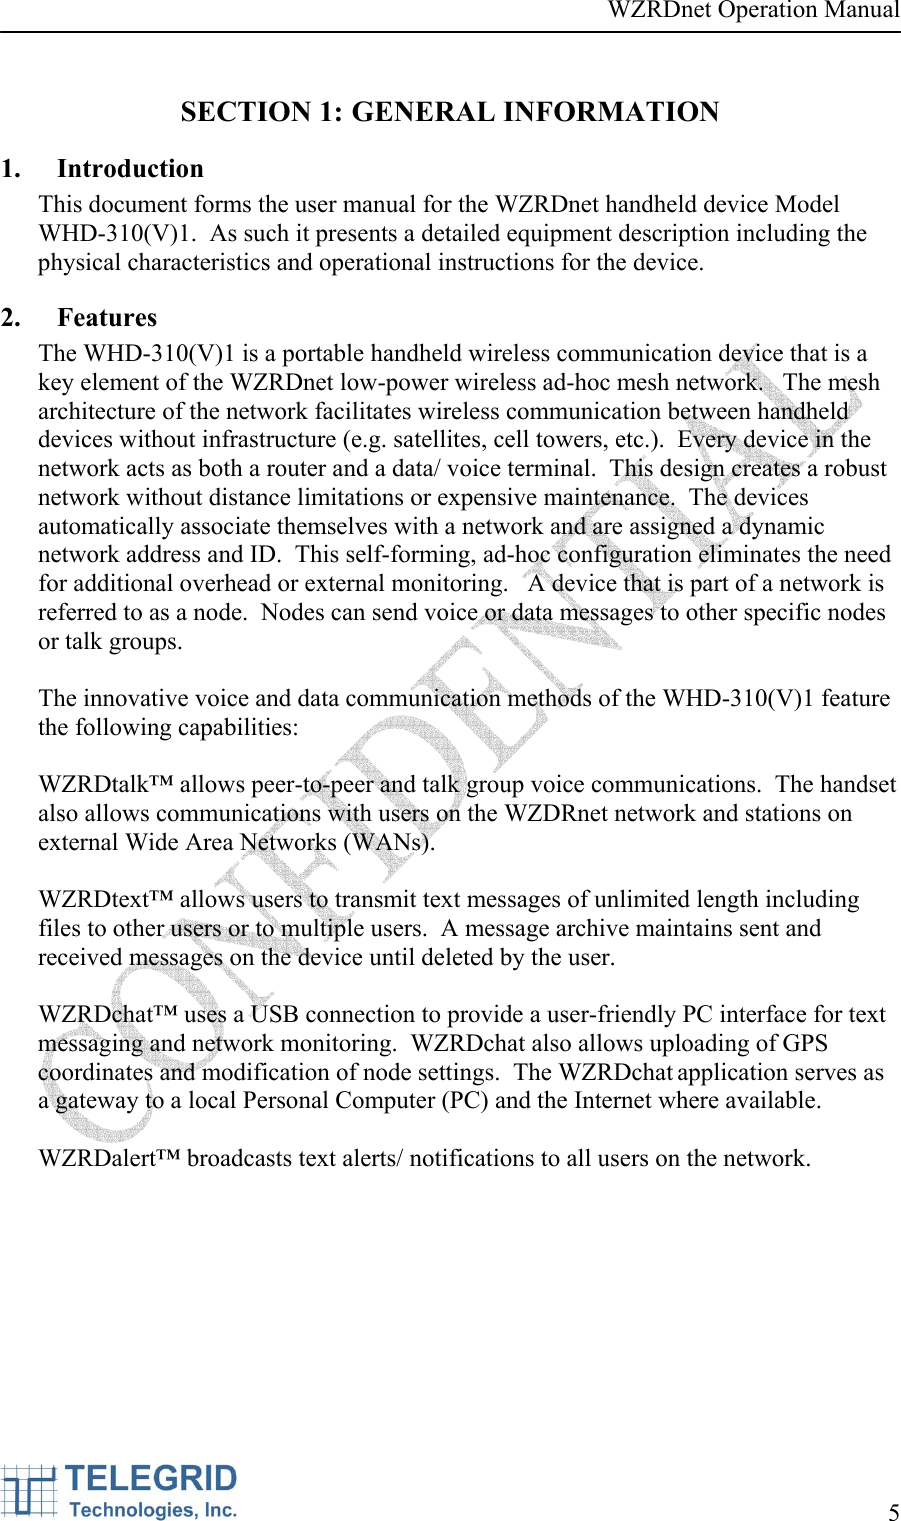 WZRDnet Operation Manual     5   SECTION 1: GENERAL INFORMATION 1. Introduction This document forms the user manual for the WZRDnet handheld device Model WHD-310(V)1.  As such it presents a detailed equipment description including the physical characteristics and operational instructions for the device. 2. Features The WHD-310(V)1 is a portable handheld wireless communication device that is a key element of the WZRDnet low-power wireless ad-hoc mesh network.   The mesh architecture of the network facilitates wireless communication between handheld devices without infrastructure (e.g. satellites, cell towers, etc.).  Every device in the network acts as both a router and a data/ voice terminal.  This design creates a robust network without distance limitations or expensive maintenance.  The devices automatically associate themselves with a network and are assigned a dynamic network address and ID.  This self-forming, ad-hoc configuration eliminates the need for additional overhead or external monitoring.   A device that is part of a network is referred to as a node.  Nodes can send voice or data messages to other specific nodes or talk groups.  The innovative voice and data communication methods of the WHD-310(V)1 feature the following capabilities:  WZRDtalk™ allows peer-to-peer and talk group voice communications.  The handset also allows communications with users on the WZDRnet network and stations on external Wide Area Networks (WANs).  WZRDtext™ allows users to transmit text messages of unlimited length including files to other users or to multiple users.  A message archive maintains sent and received messages on the device until deleted by the user.  WZRDchat™ uses a USB connection to provide a user-friendly PC interface for text messaging and network monitoring.  WZRDchat also allows uploading of GPS coordinates and modification of node settings.  The WZRDchat application serves as a gateway to a local Personal Computer (PC) and the Internet where available.  WZRDalert™ broadcasts text alerts/ notifications to all users on the network.    